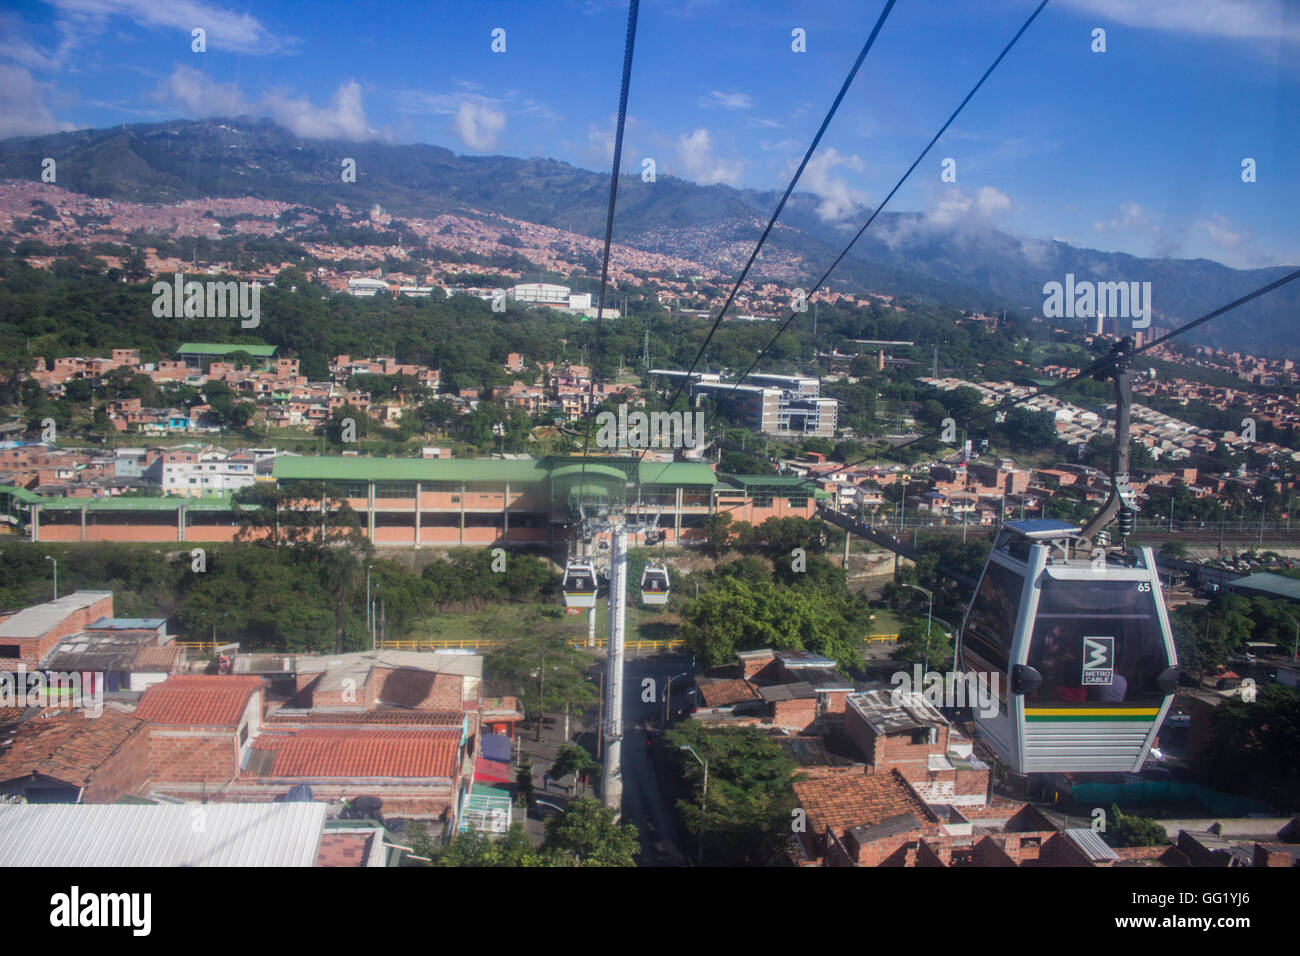 The service of metrocable, Medellin. Stock Photo